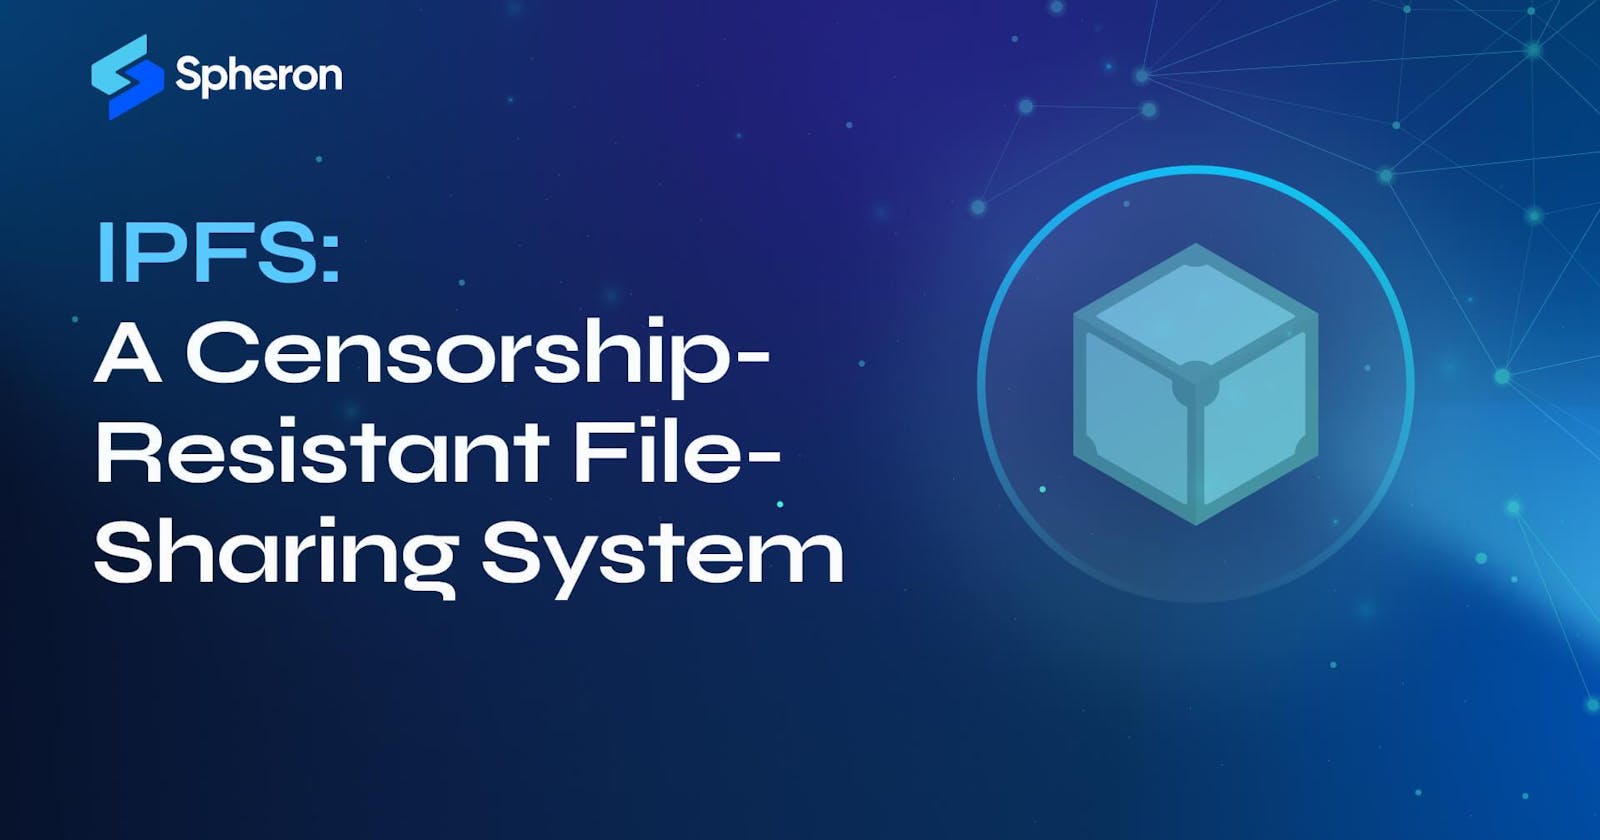 IPFS: A Censorship-Resistant File-Sharing System